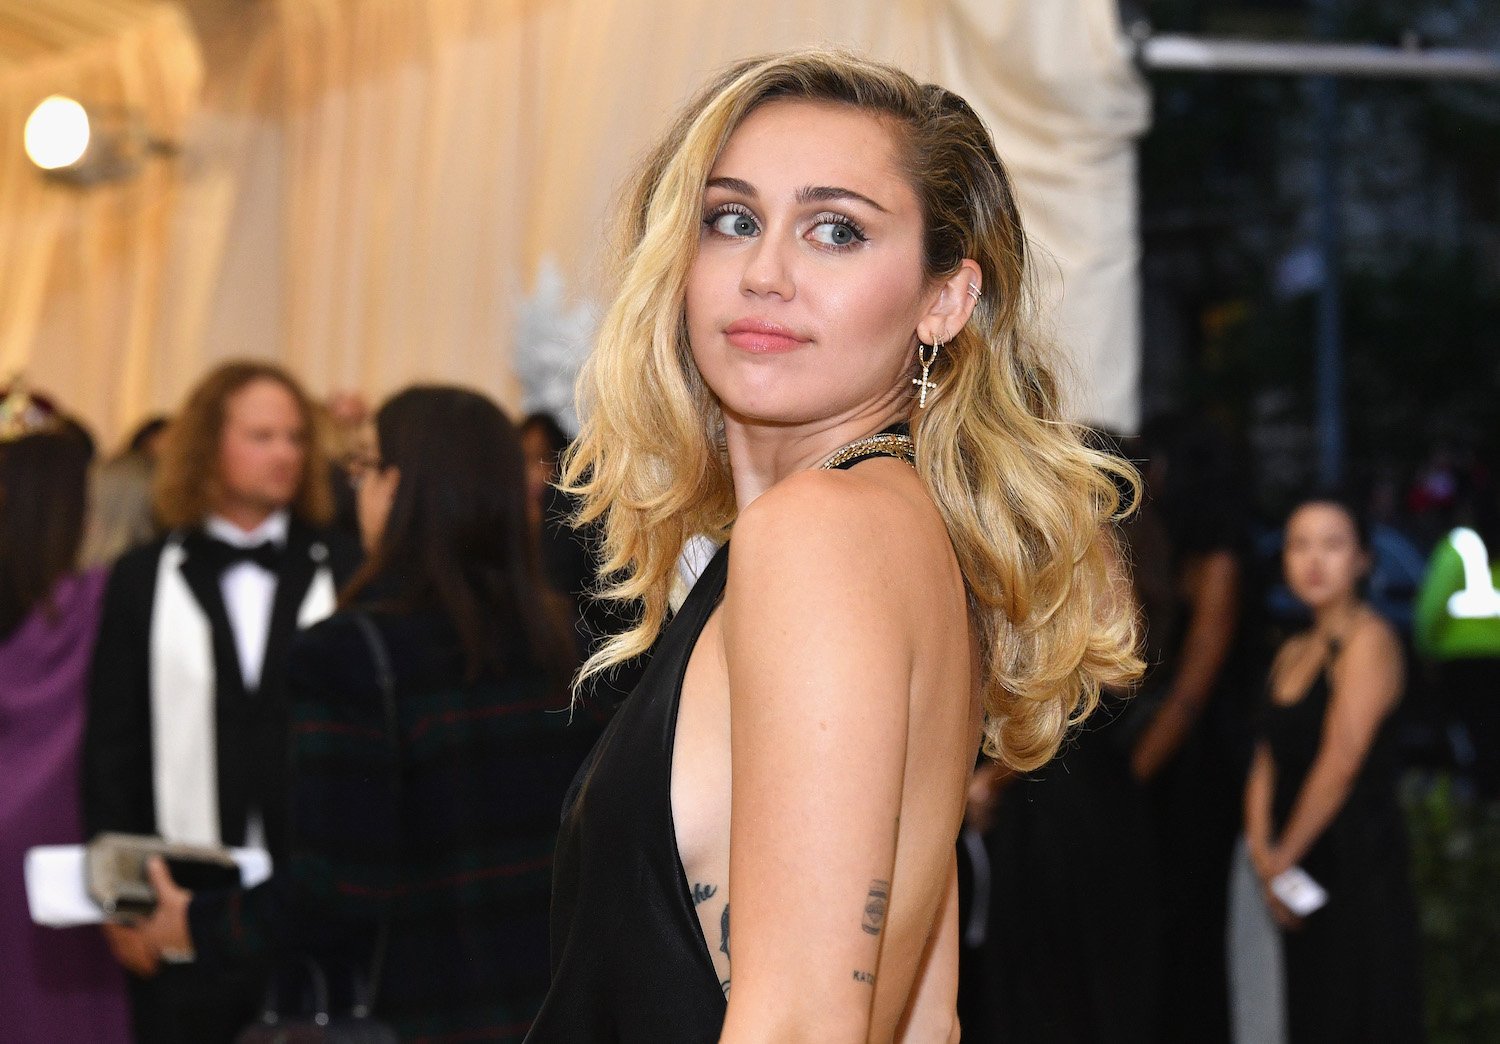 Miley Cyrus attends the Heavenly Bodies: Fashion & The Catholic Imagination Costume Institute Gala at The Metropolitan Museum of Art on May 7, 2018